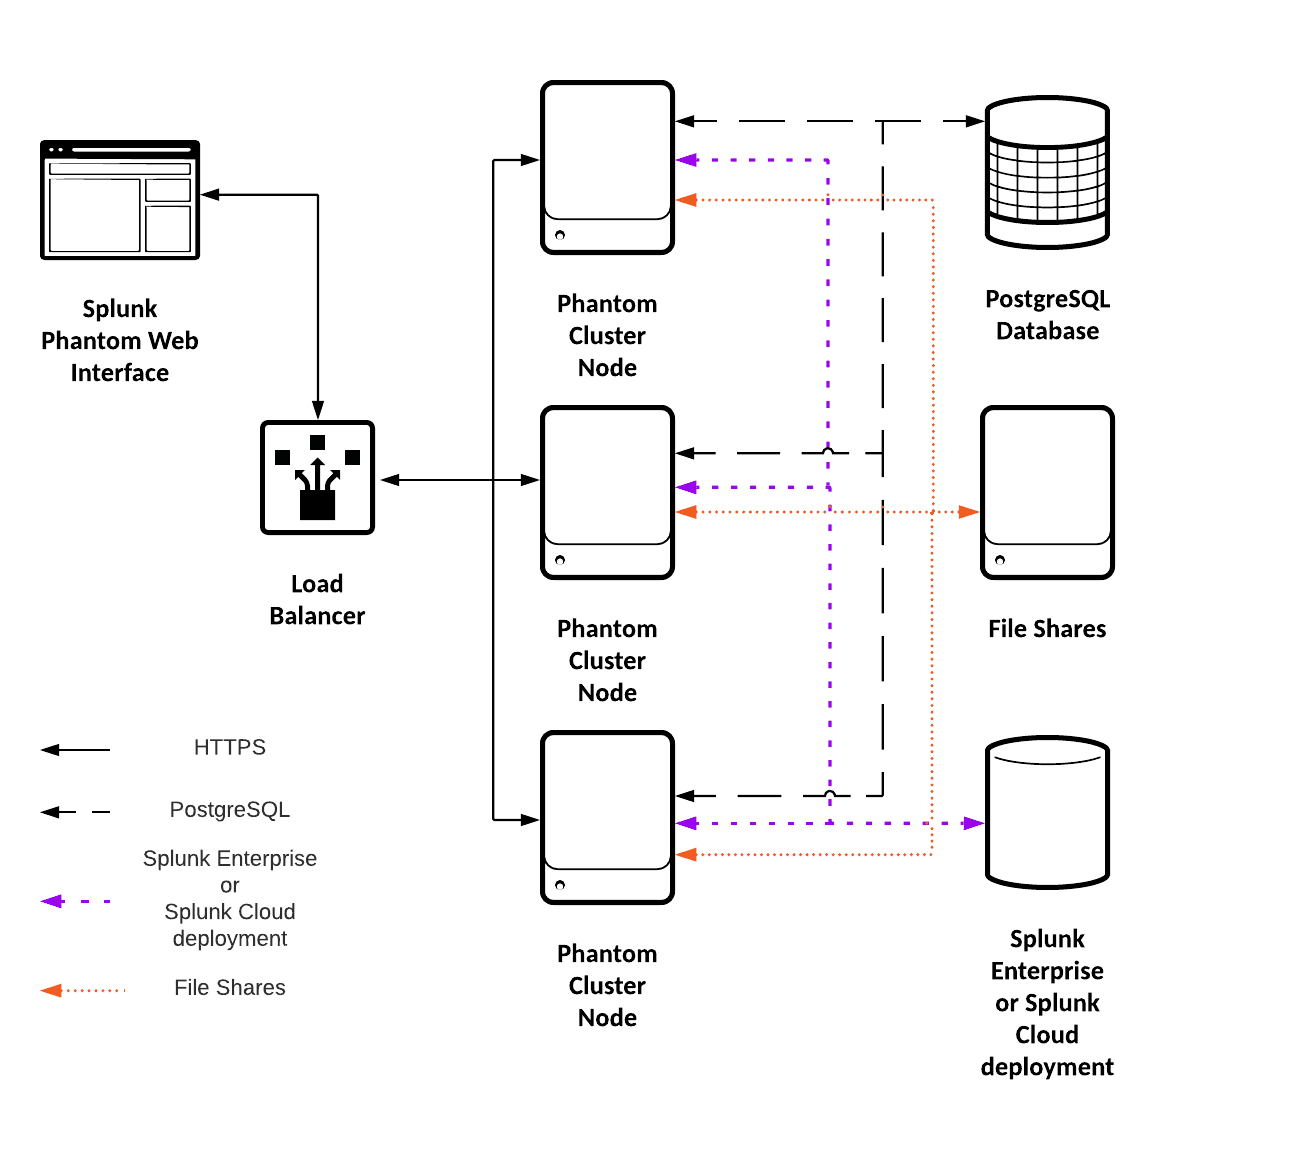 A diagram of a Splunk Phantom cluster showing the connections between components using arrows. The diagram shows from left to right, an icon for the Splunk Phantom web UI, a load balancer, three Splunk Phantom cluster nodes in a column, then another column with PostgreSQL database at the top, a file share, and at the bottom an icon representing either a Splunk Enterprise or Splunk Cloud deployment.